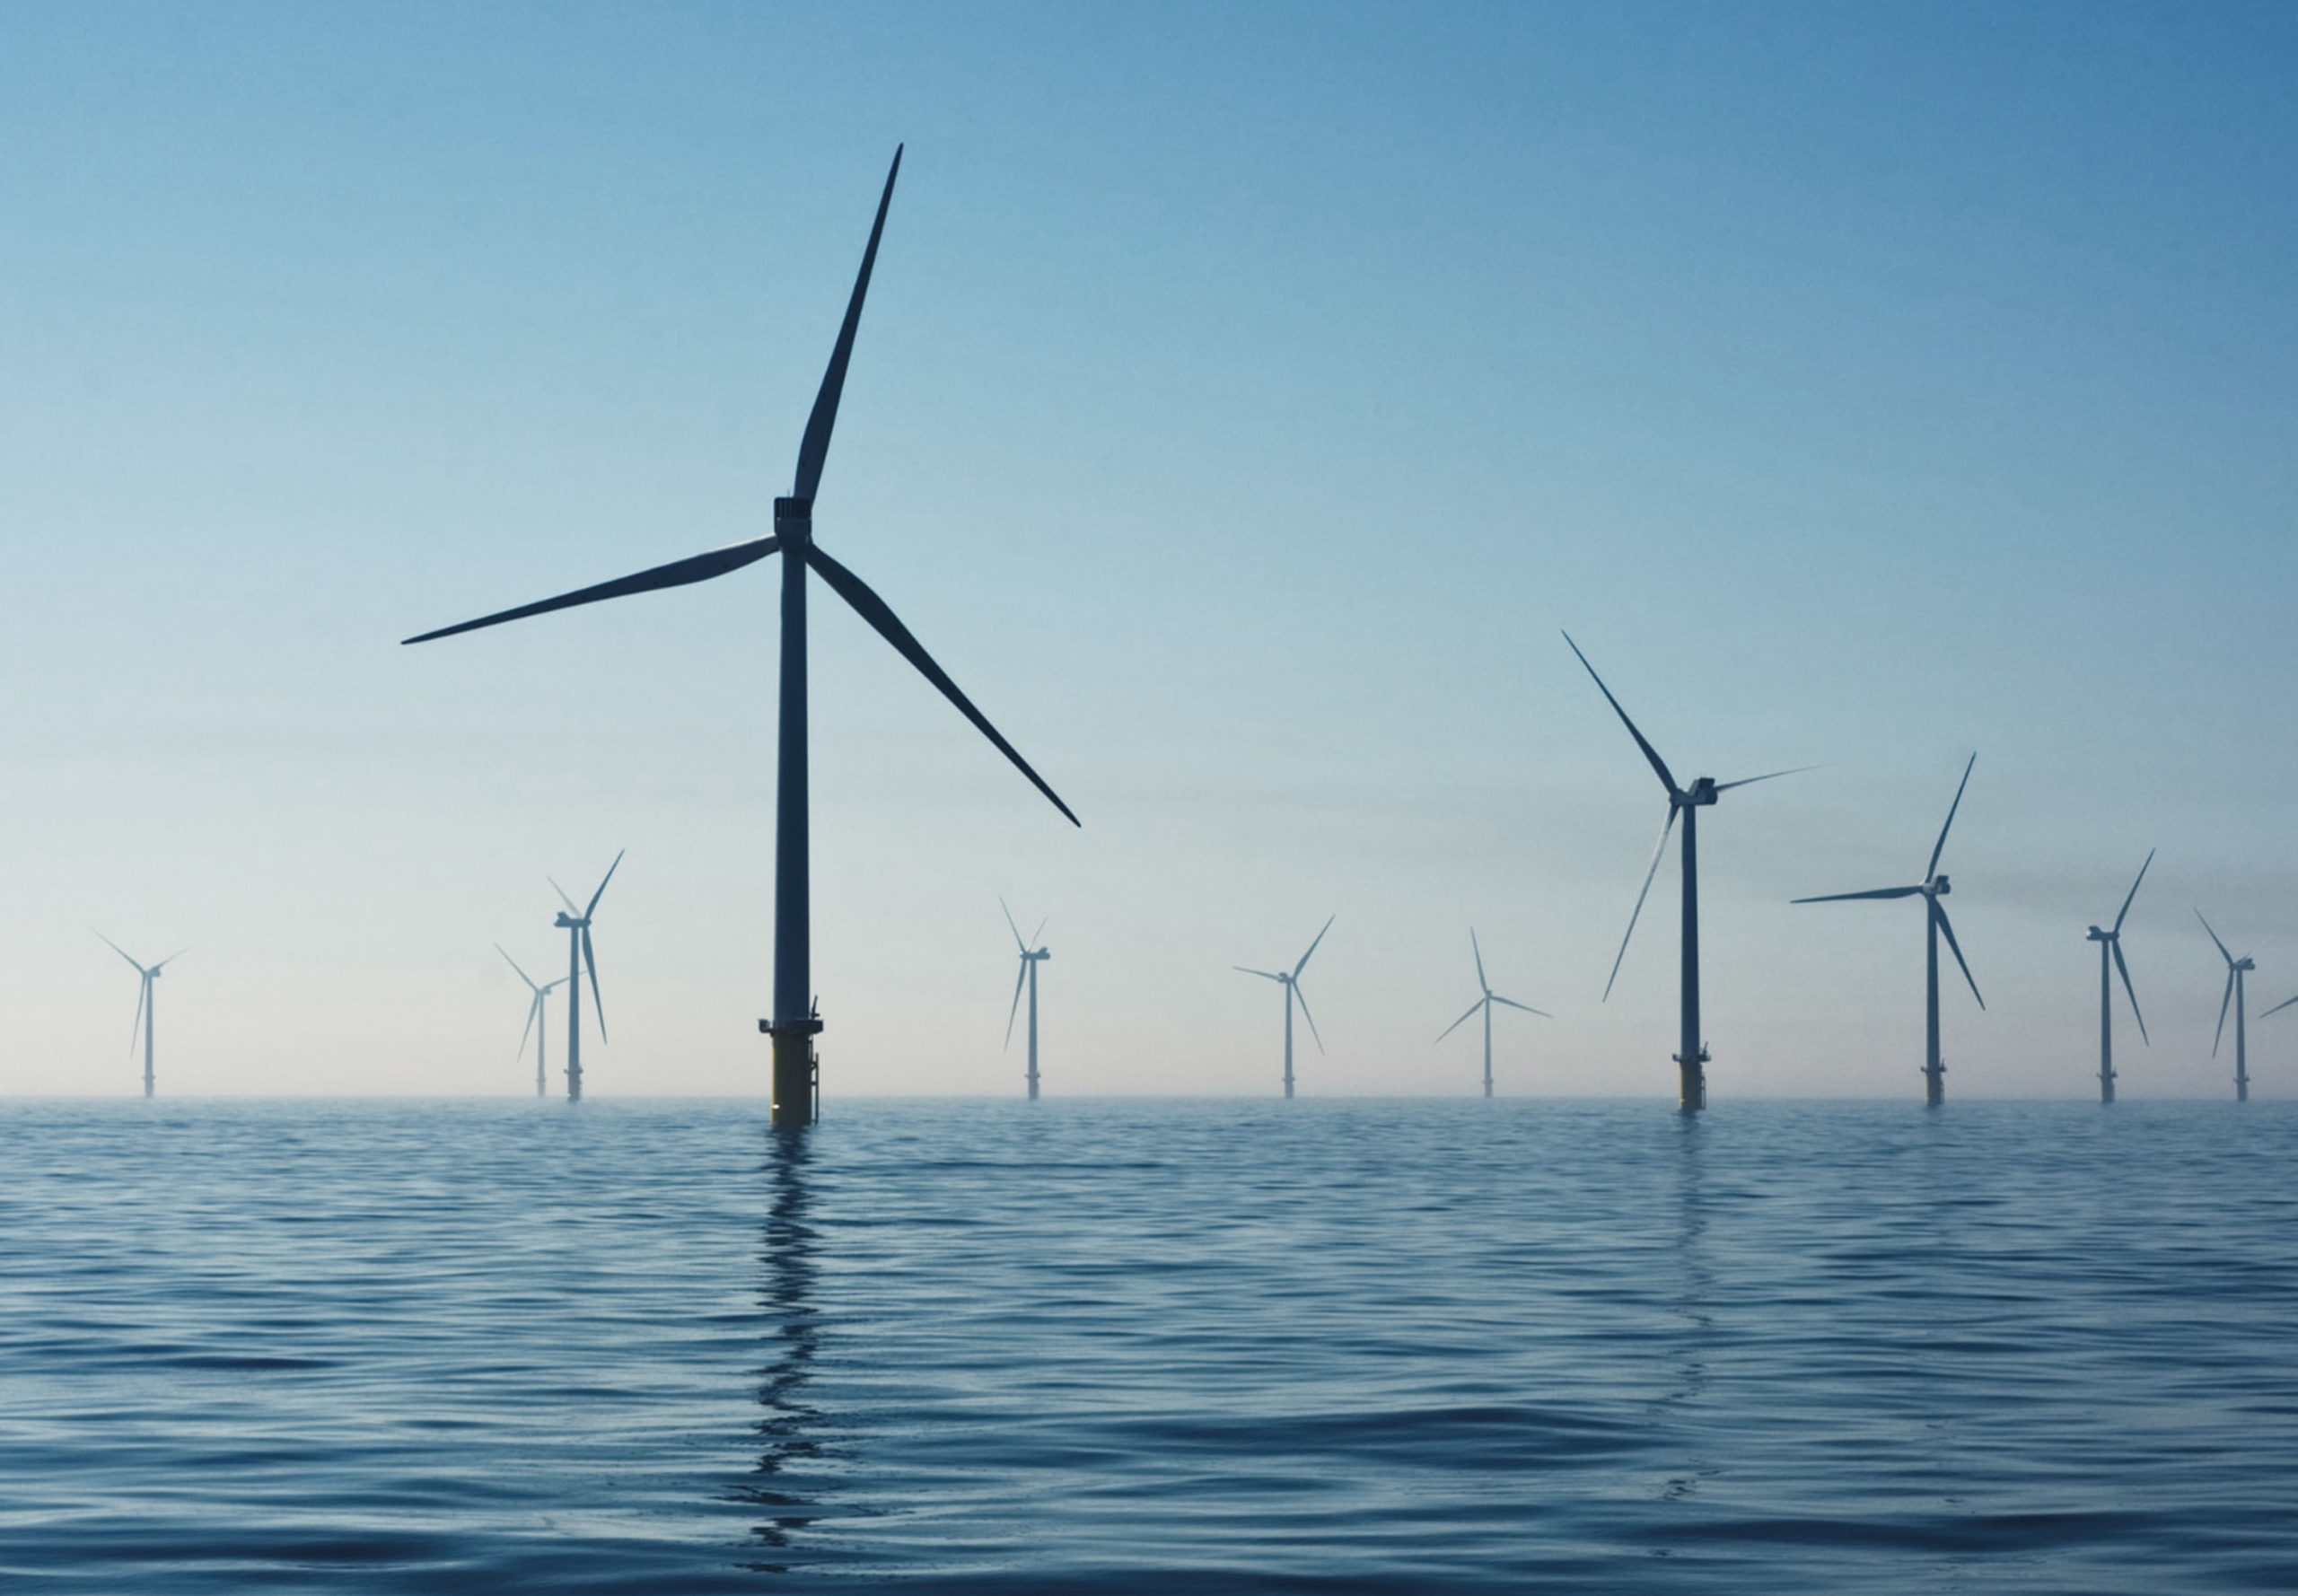 Ireland's unmatched offshore wind potential.